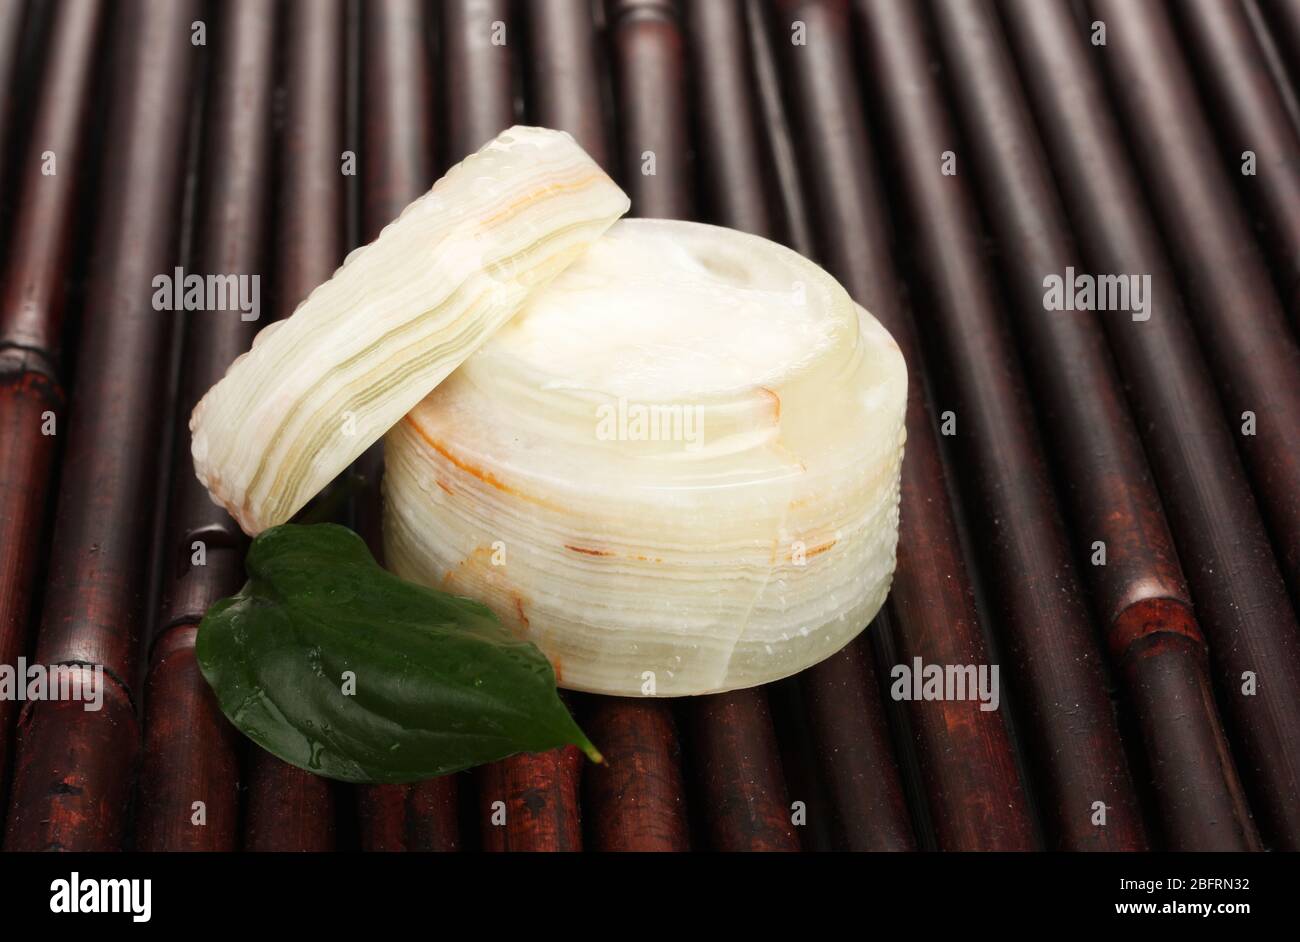 Opened jar of cream with fresh green leaf on bamboo mat with water droplets Stock Photo